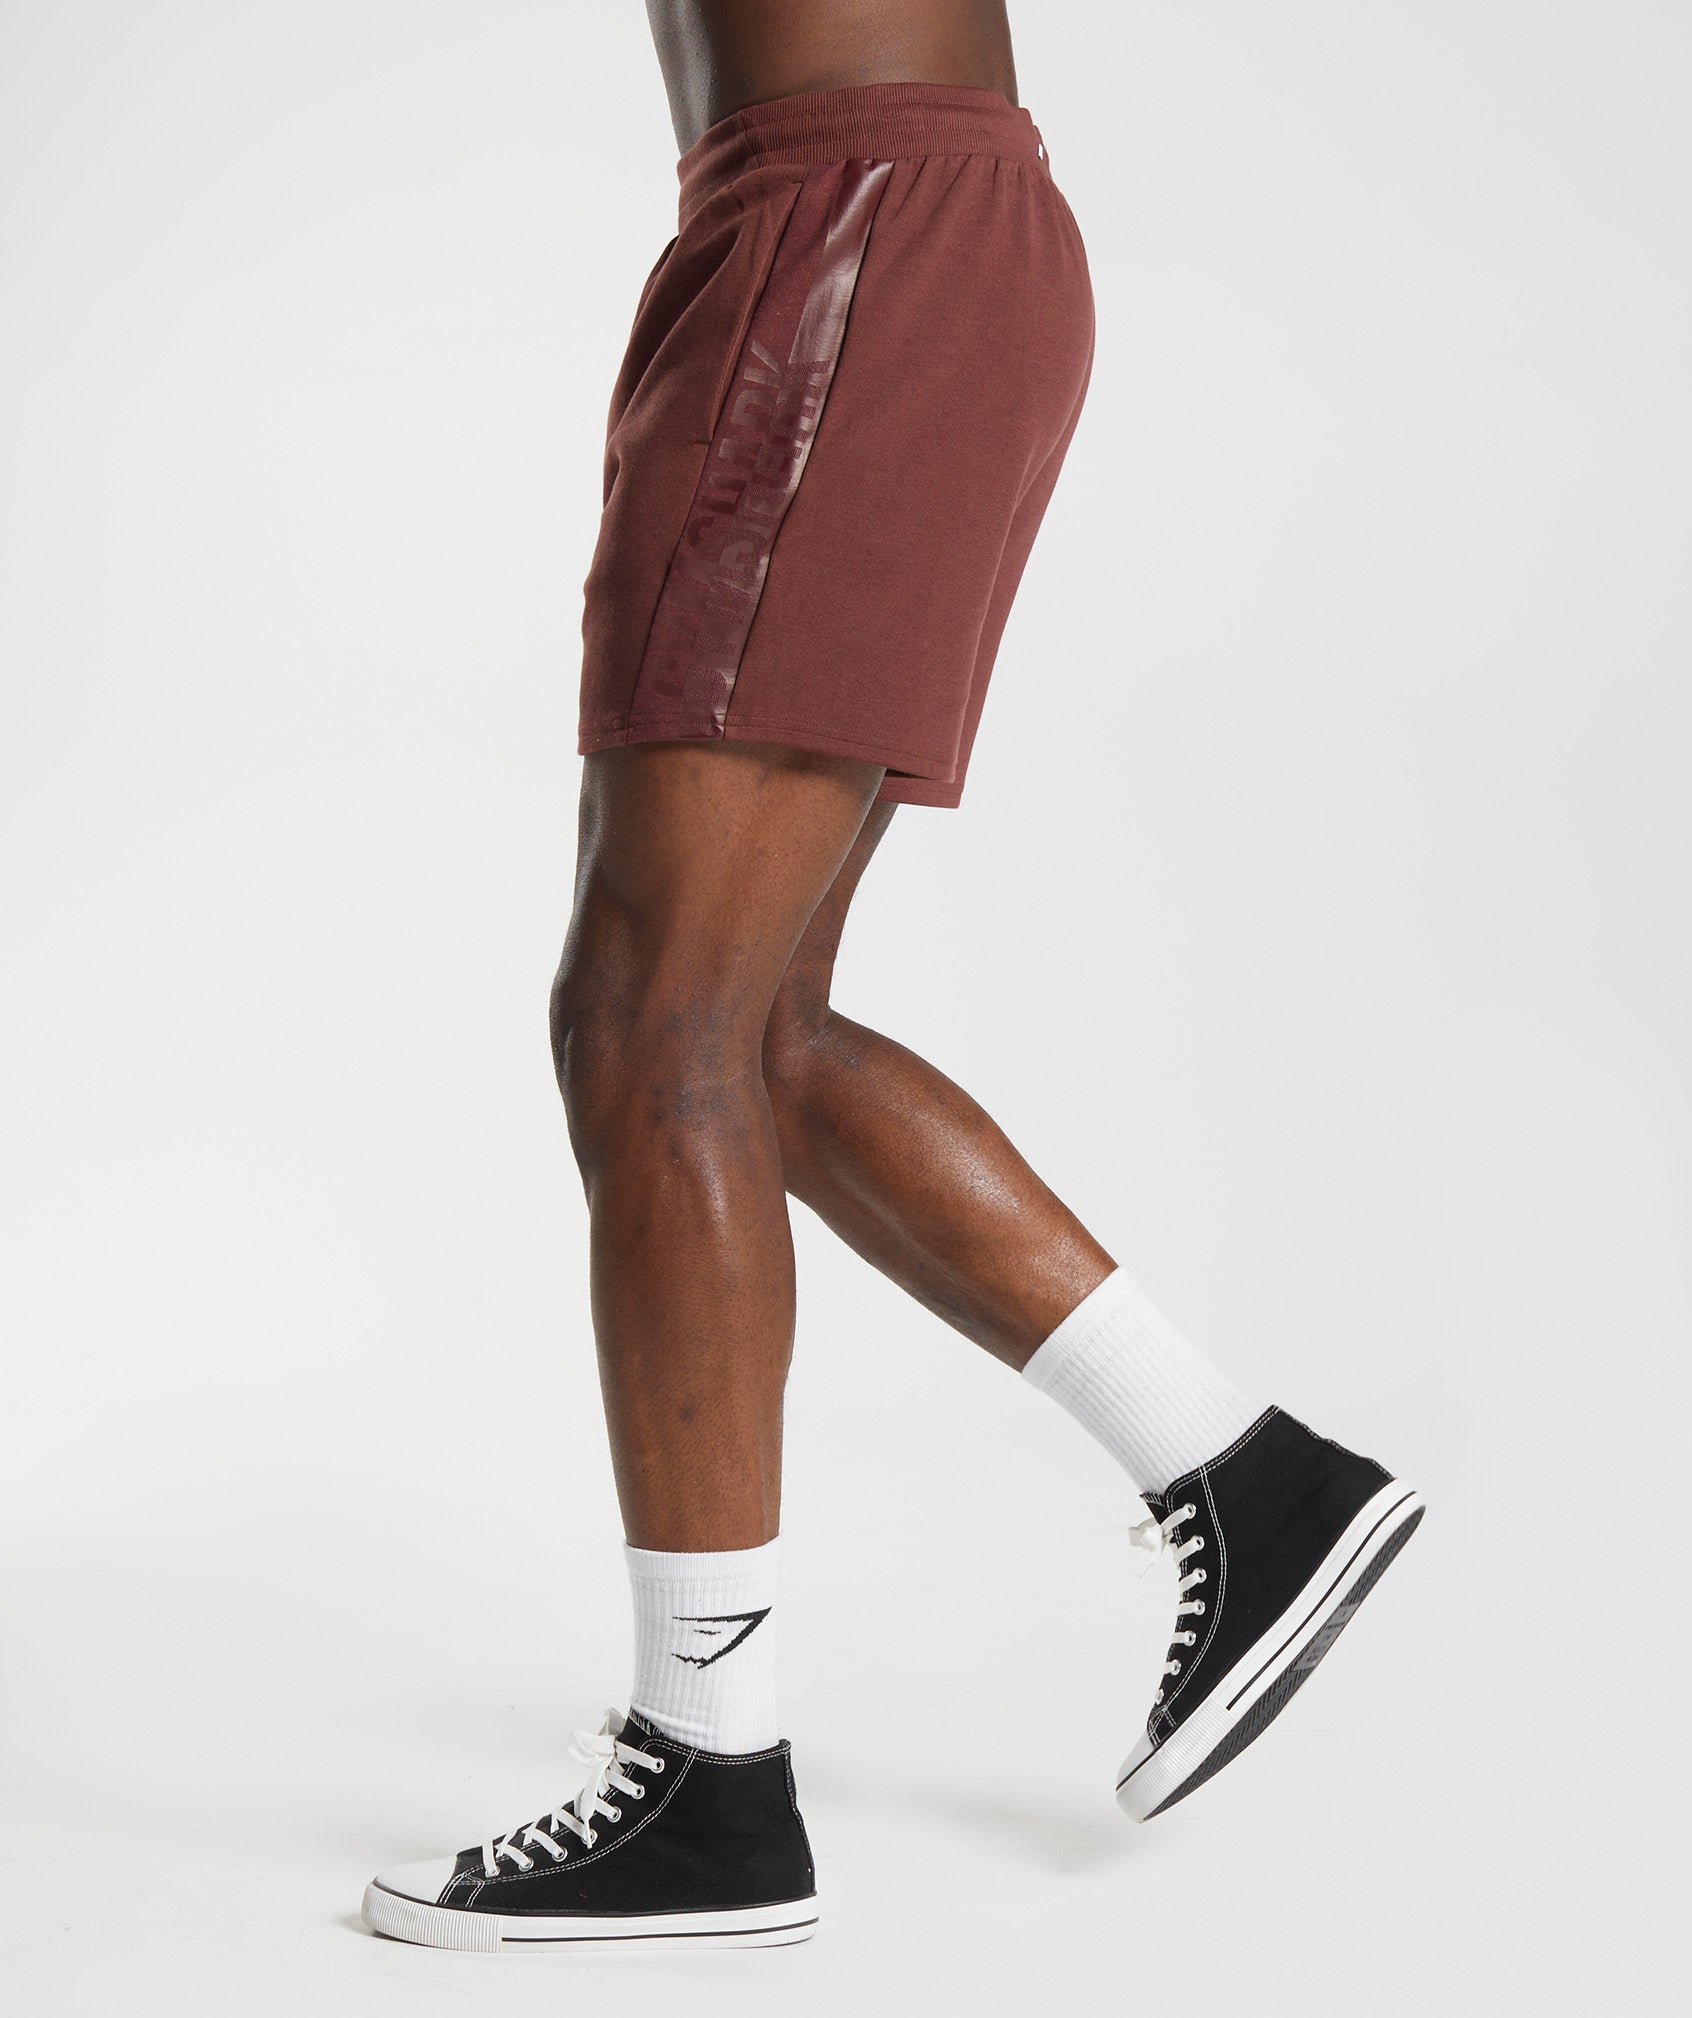 Bold React 5" Shorts in Cherry Brown - view 3